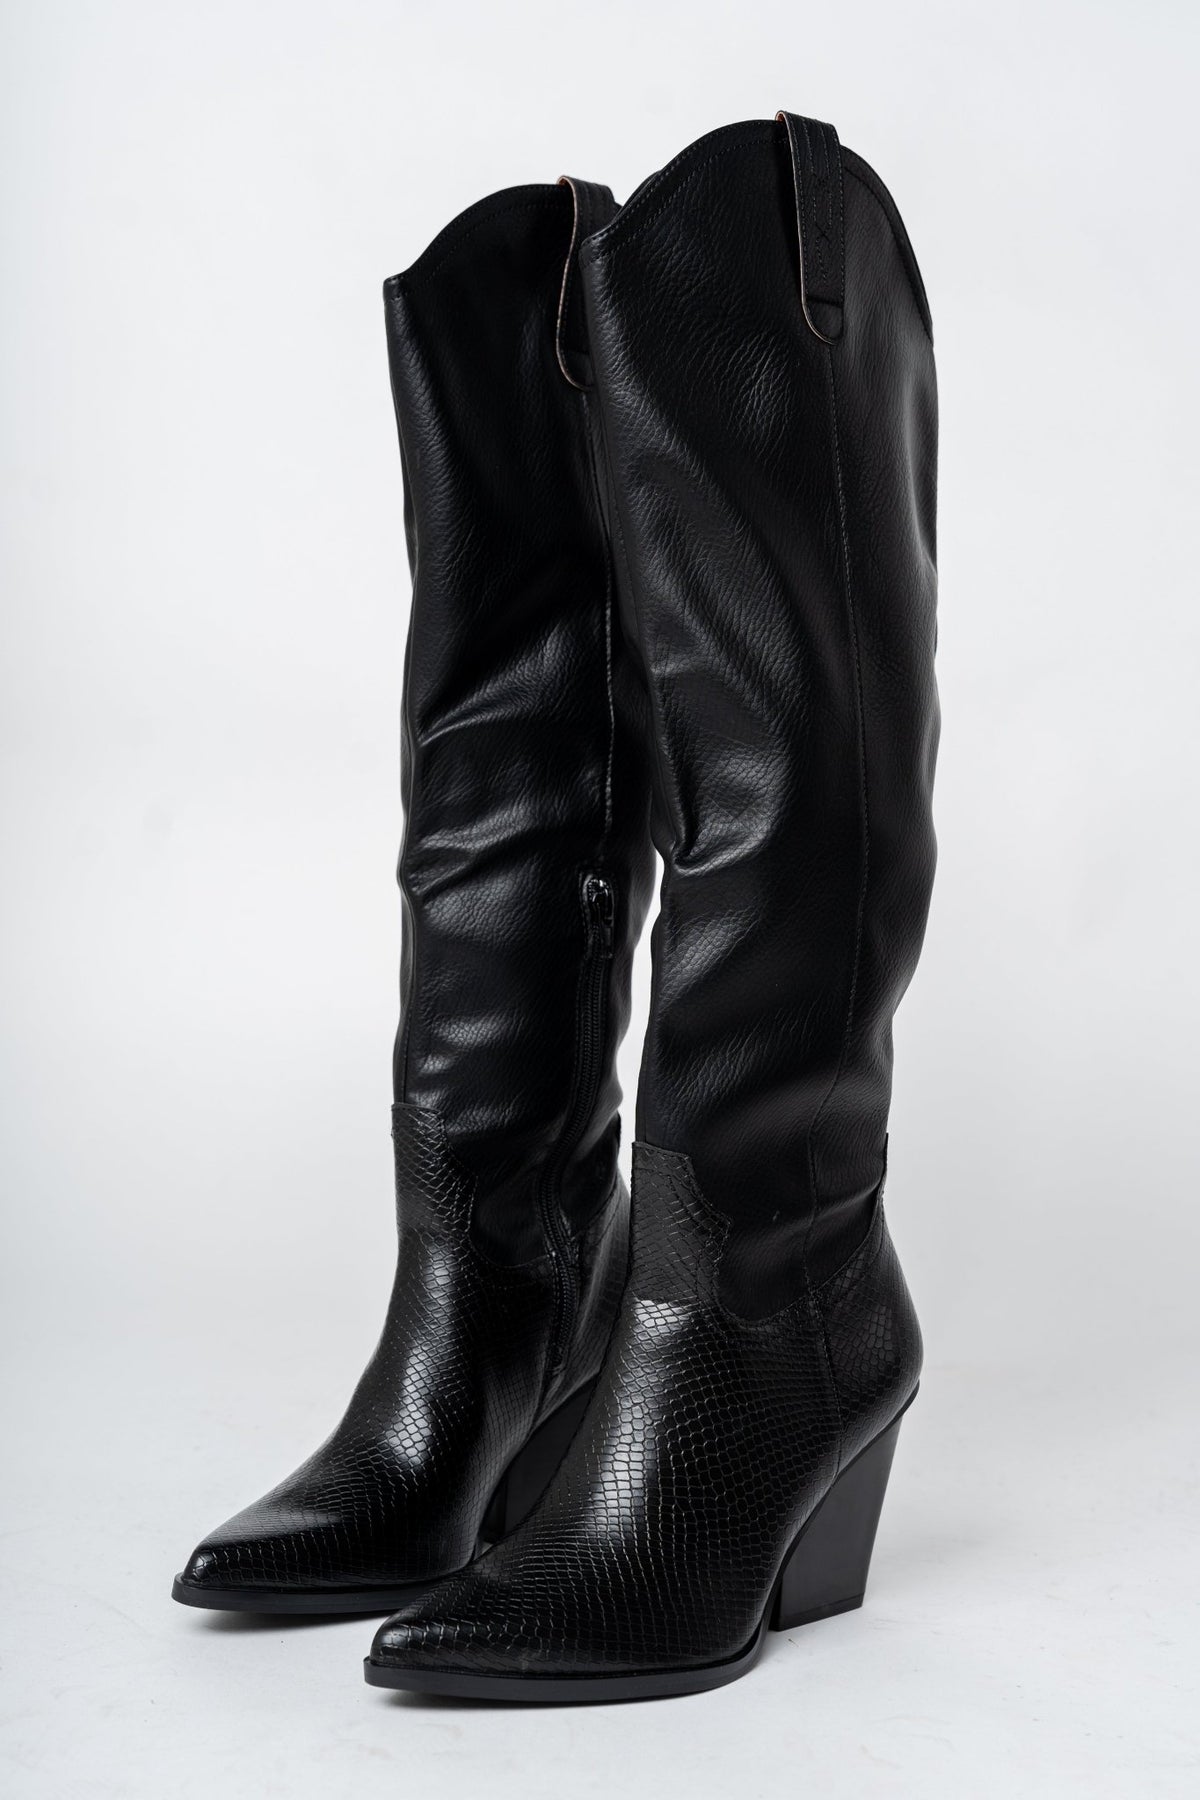 Barcelona western boot black - Cute shoes - Trendy Shoes at Lush Fashion Lounge Boutique in Oklahoma City